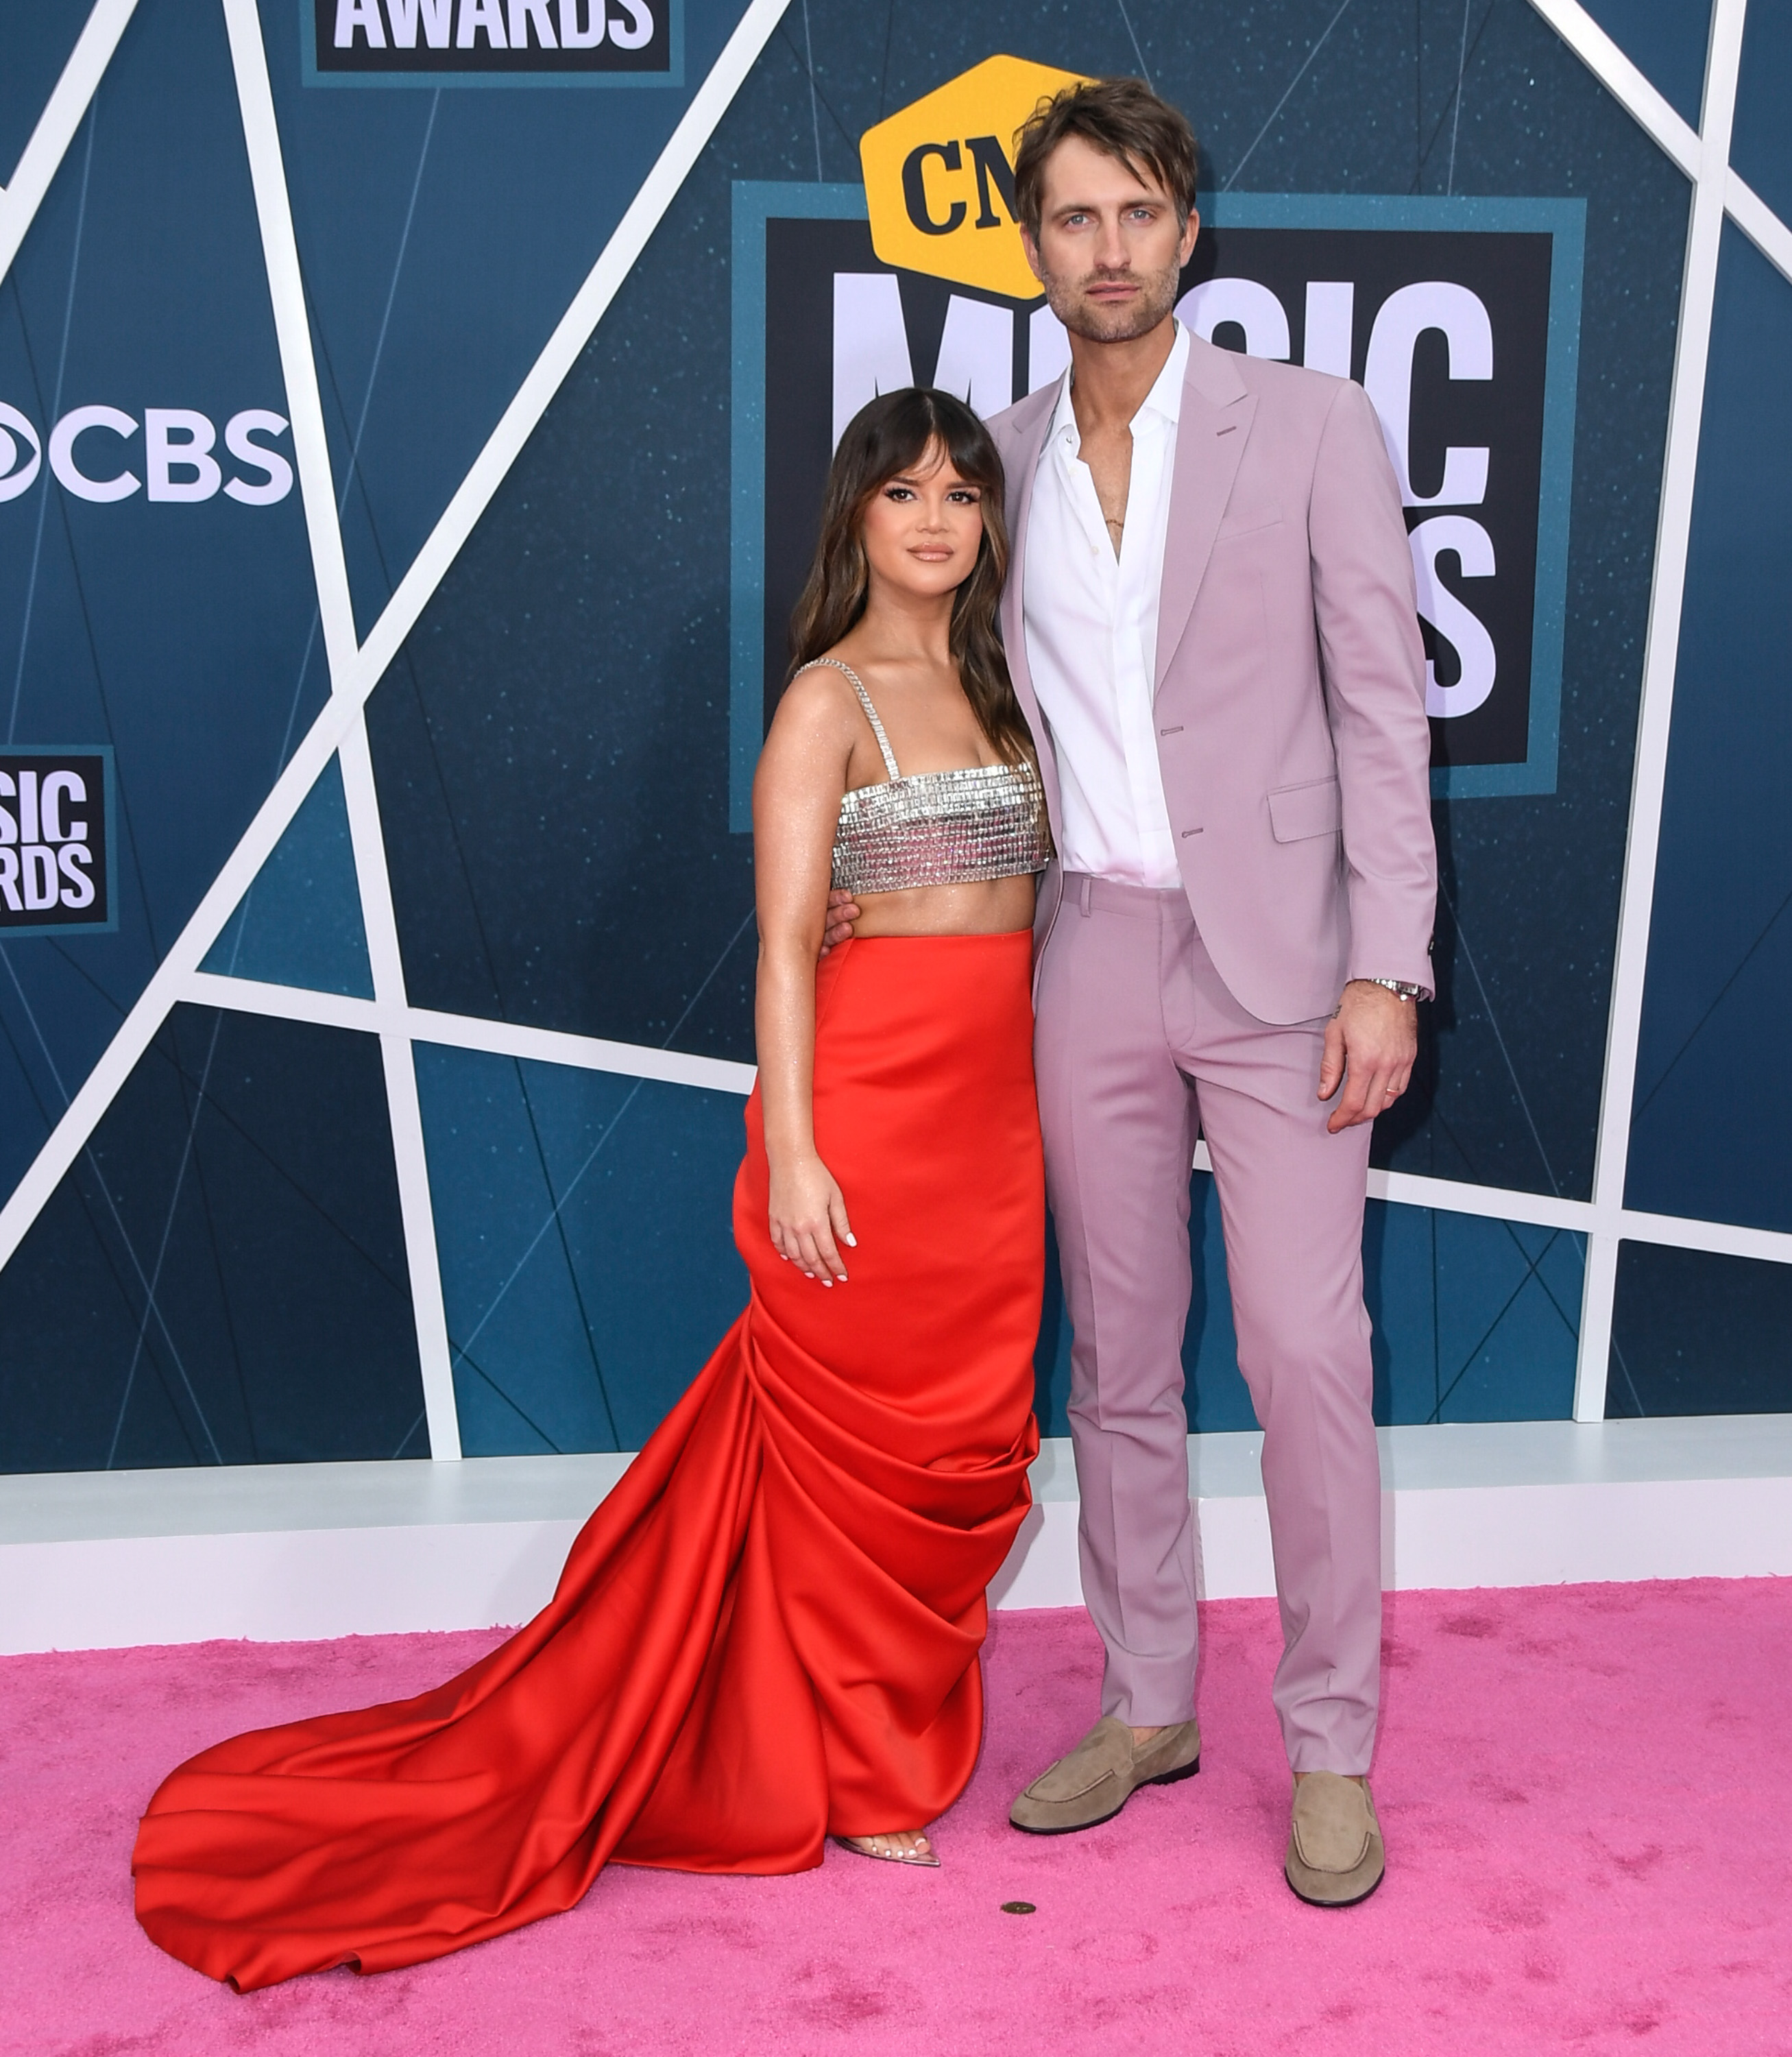 Maren pictured with her ex-husband Ryan Hurd at an event in April 2022